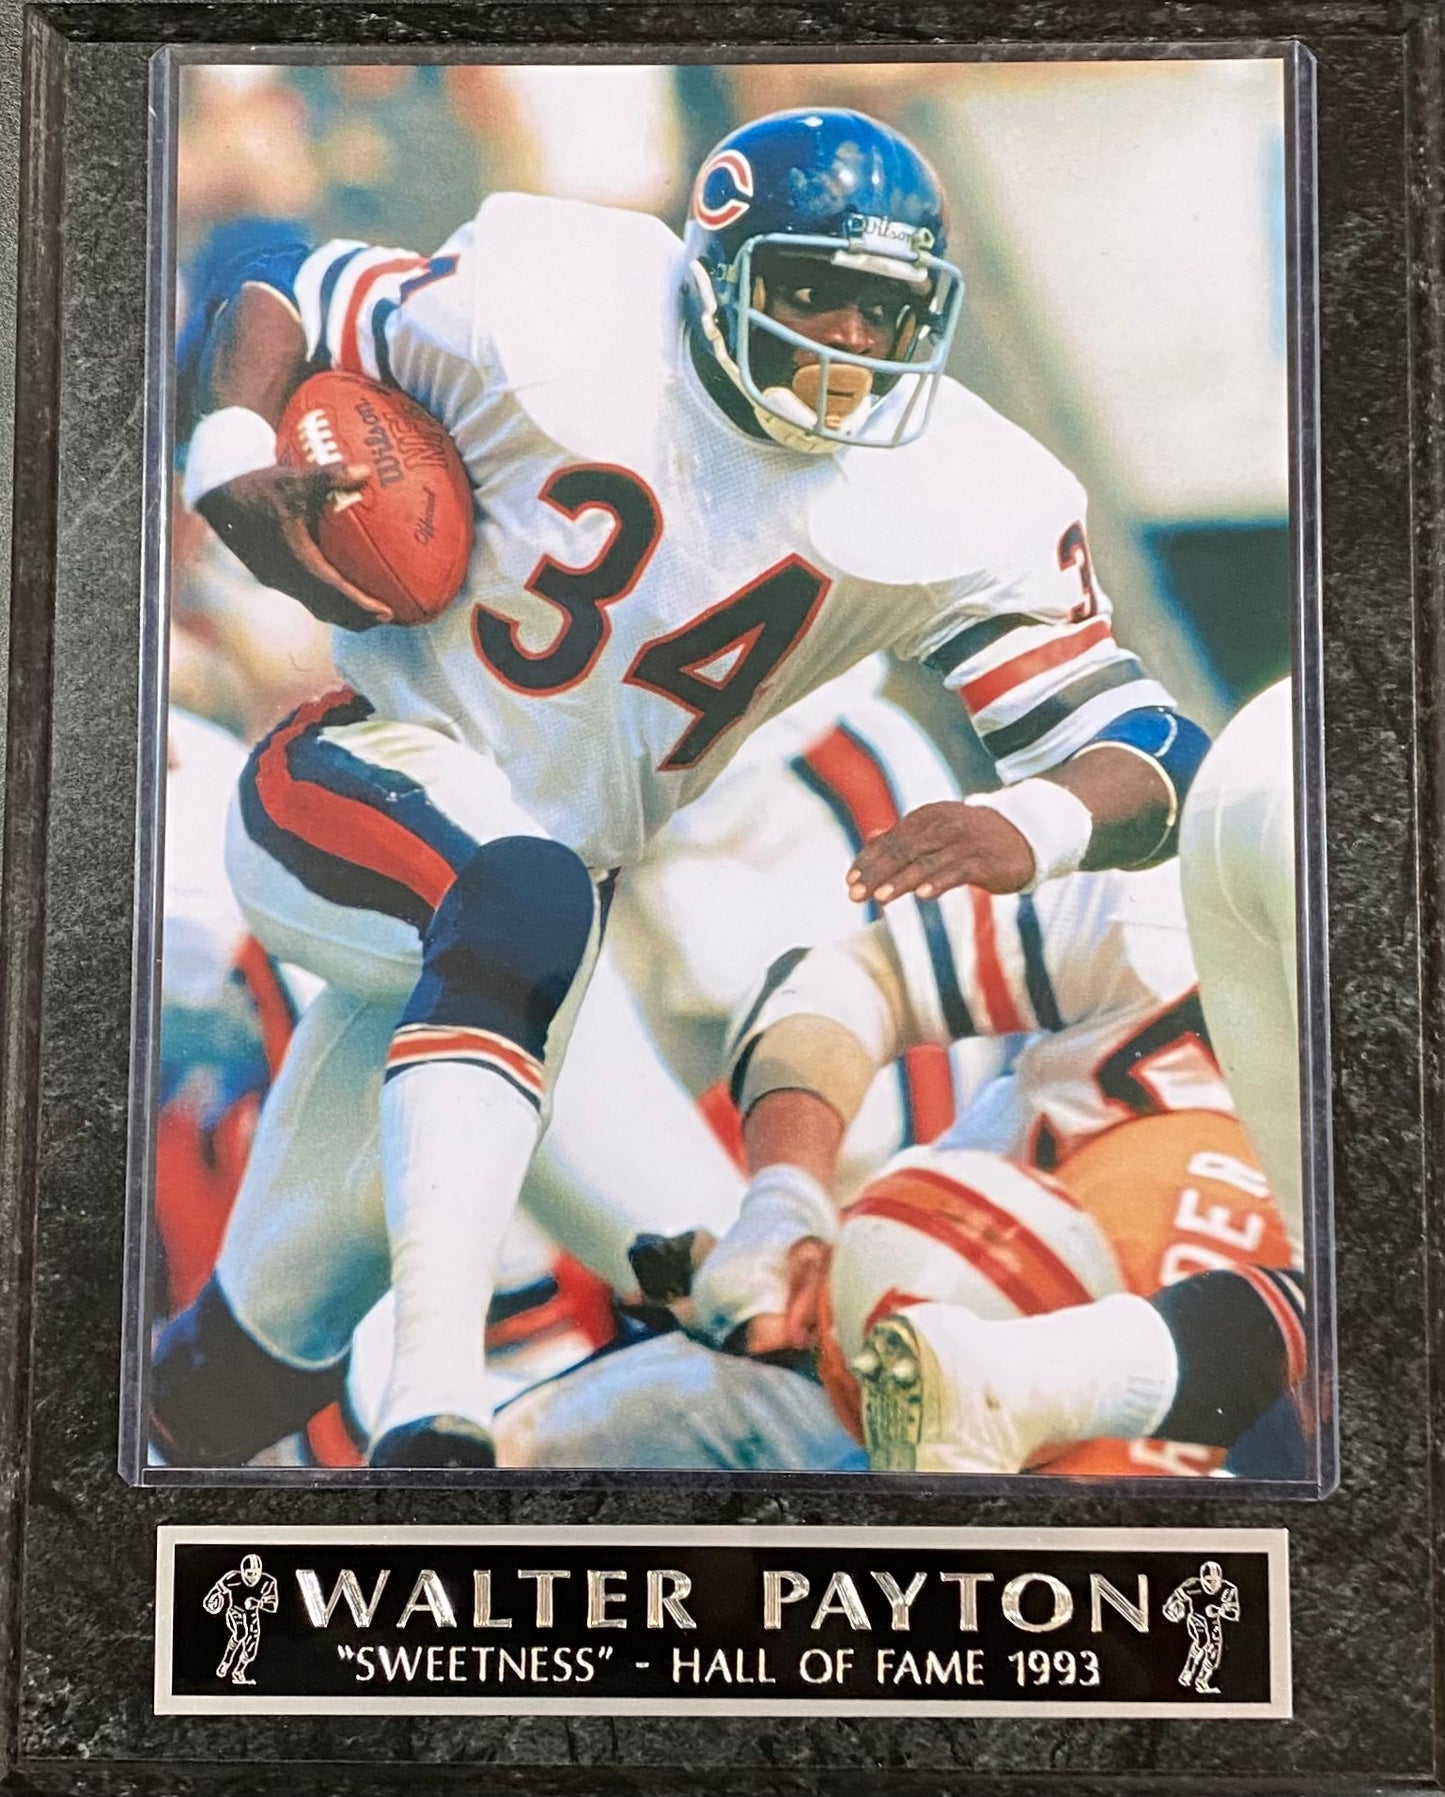 Walter Payton "Sweetness" Hall of Fame 1993 Chicago Bears Plaque